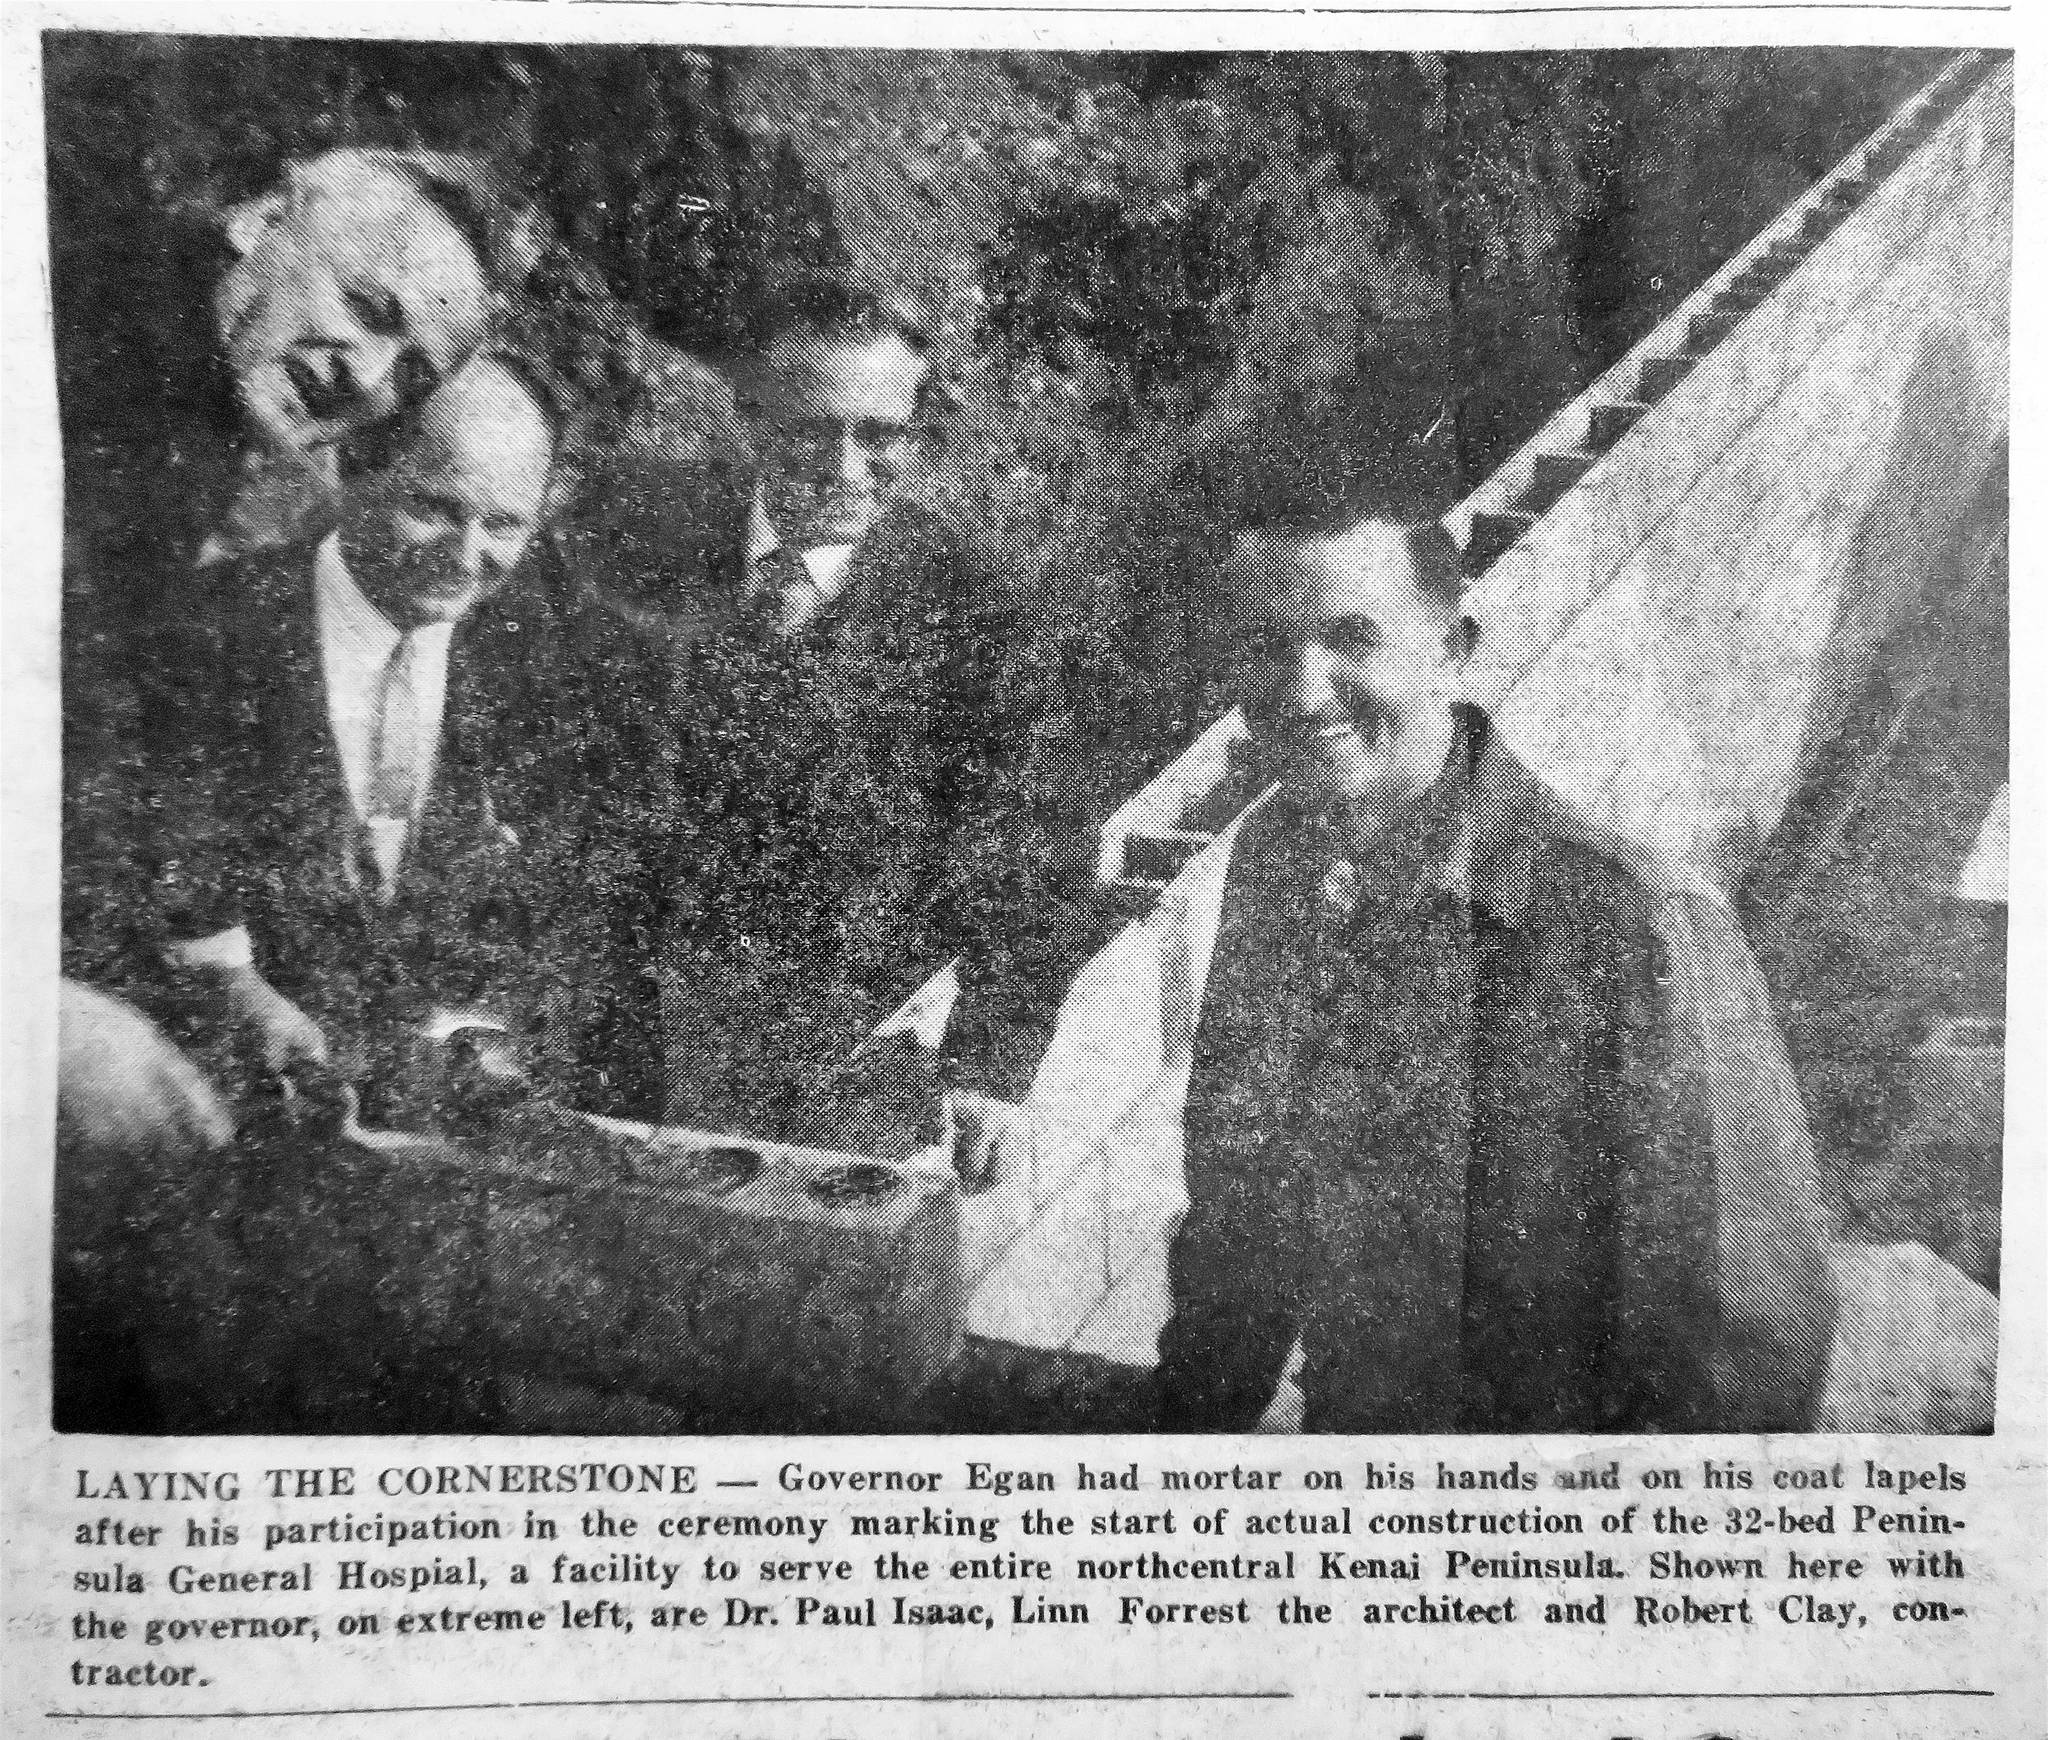 Cheechako News photo
Alaska Gov. William A. Egan (far left) helps to lay the cornerstone for the new hospital in a September 1966 ceremony. Also pictured (L-R) are Dr. Paul Isaak, architect Linn Forrest and general contractor Robert Clay.